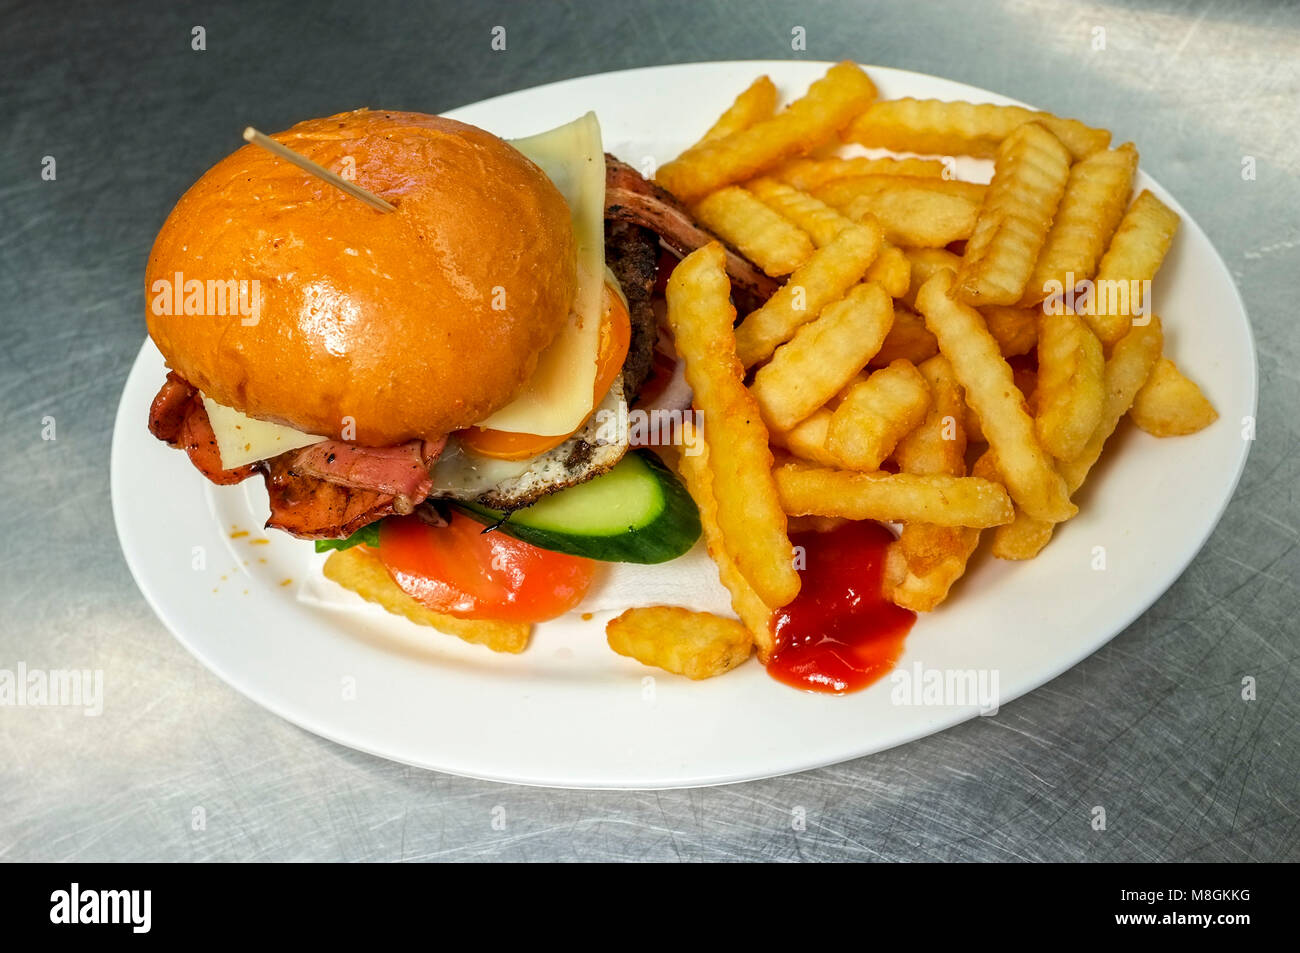 Aussie burger with a side of French fries. Stock Photo